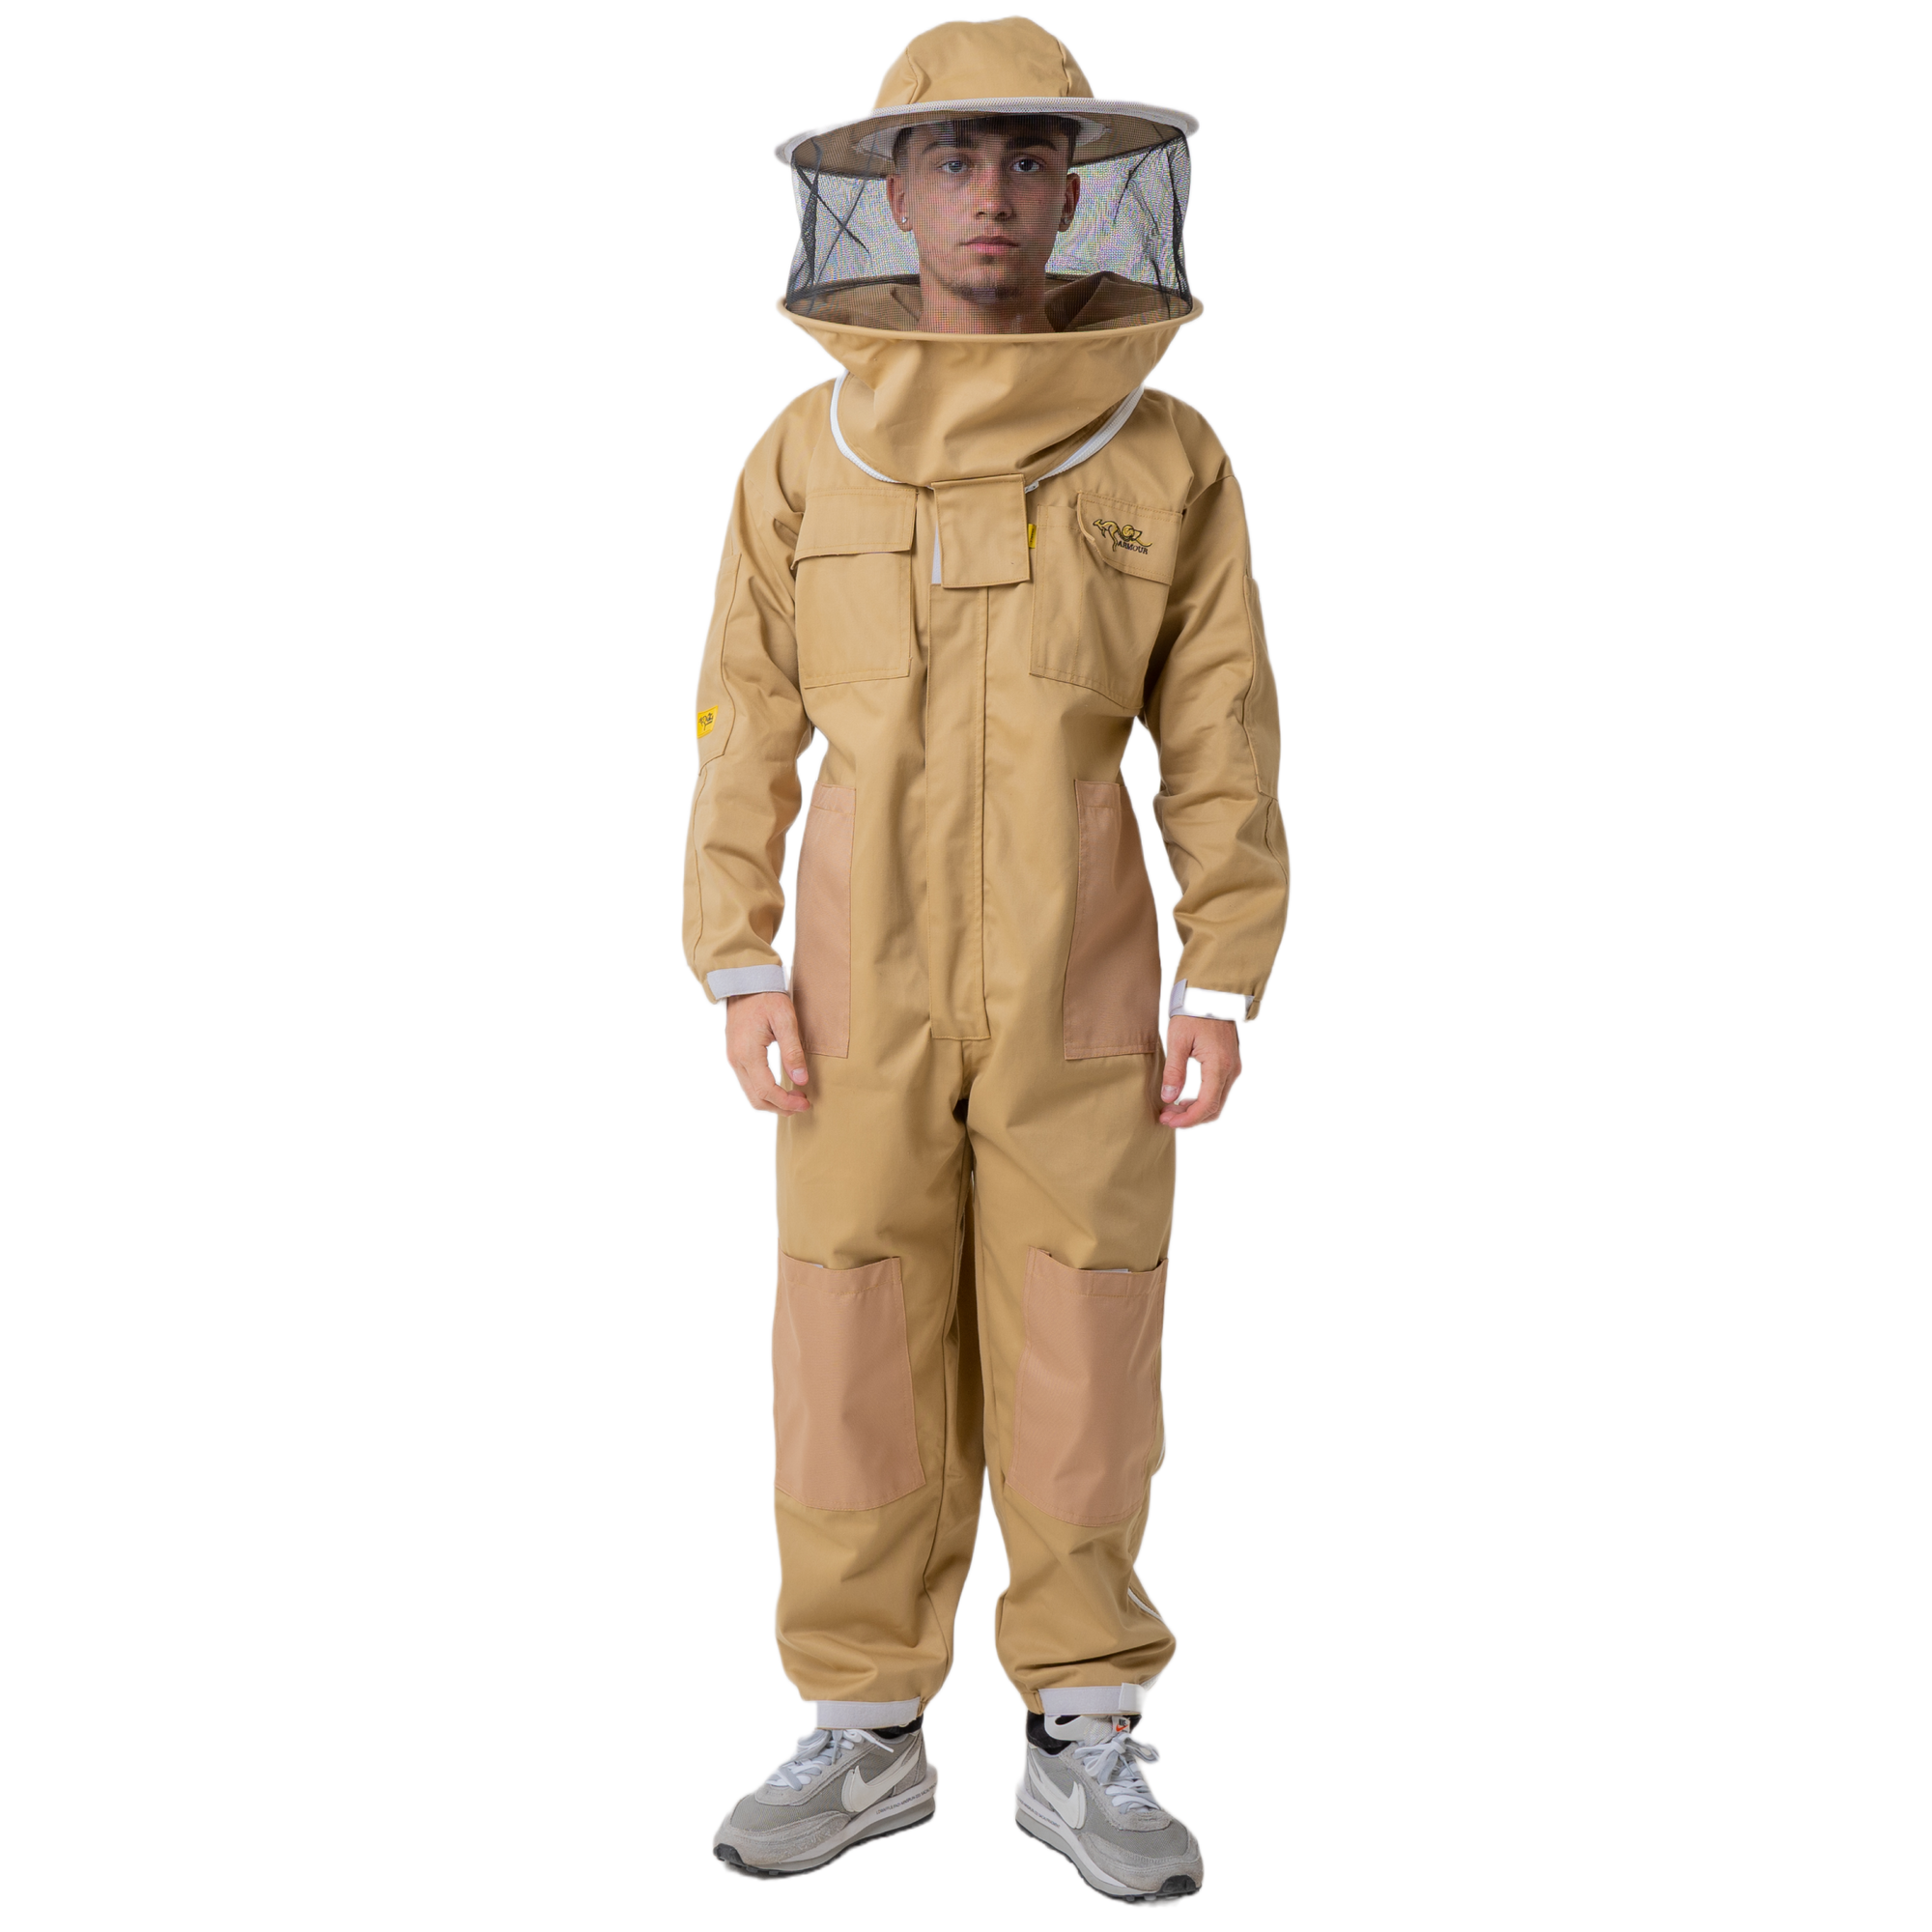 OZ ARMOUR beekeeping suit in khaki with round hat